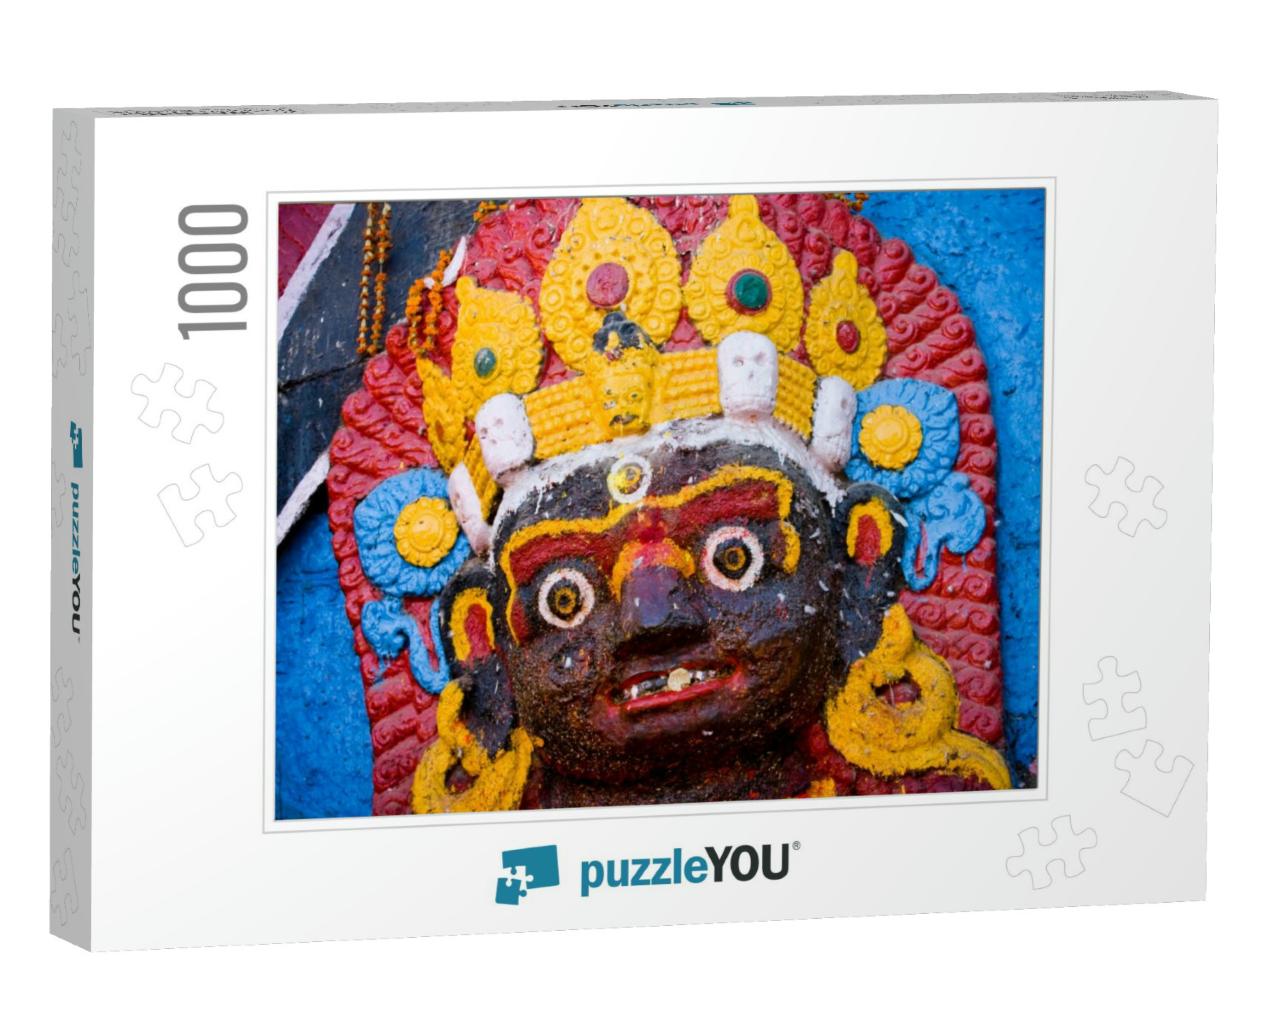 Kaal Bhairav Statue At Kathmandu Durbar Square, Nepal... Jigsaw Puzzle with 1000 pieces